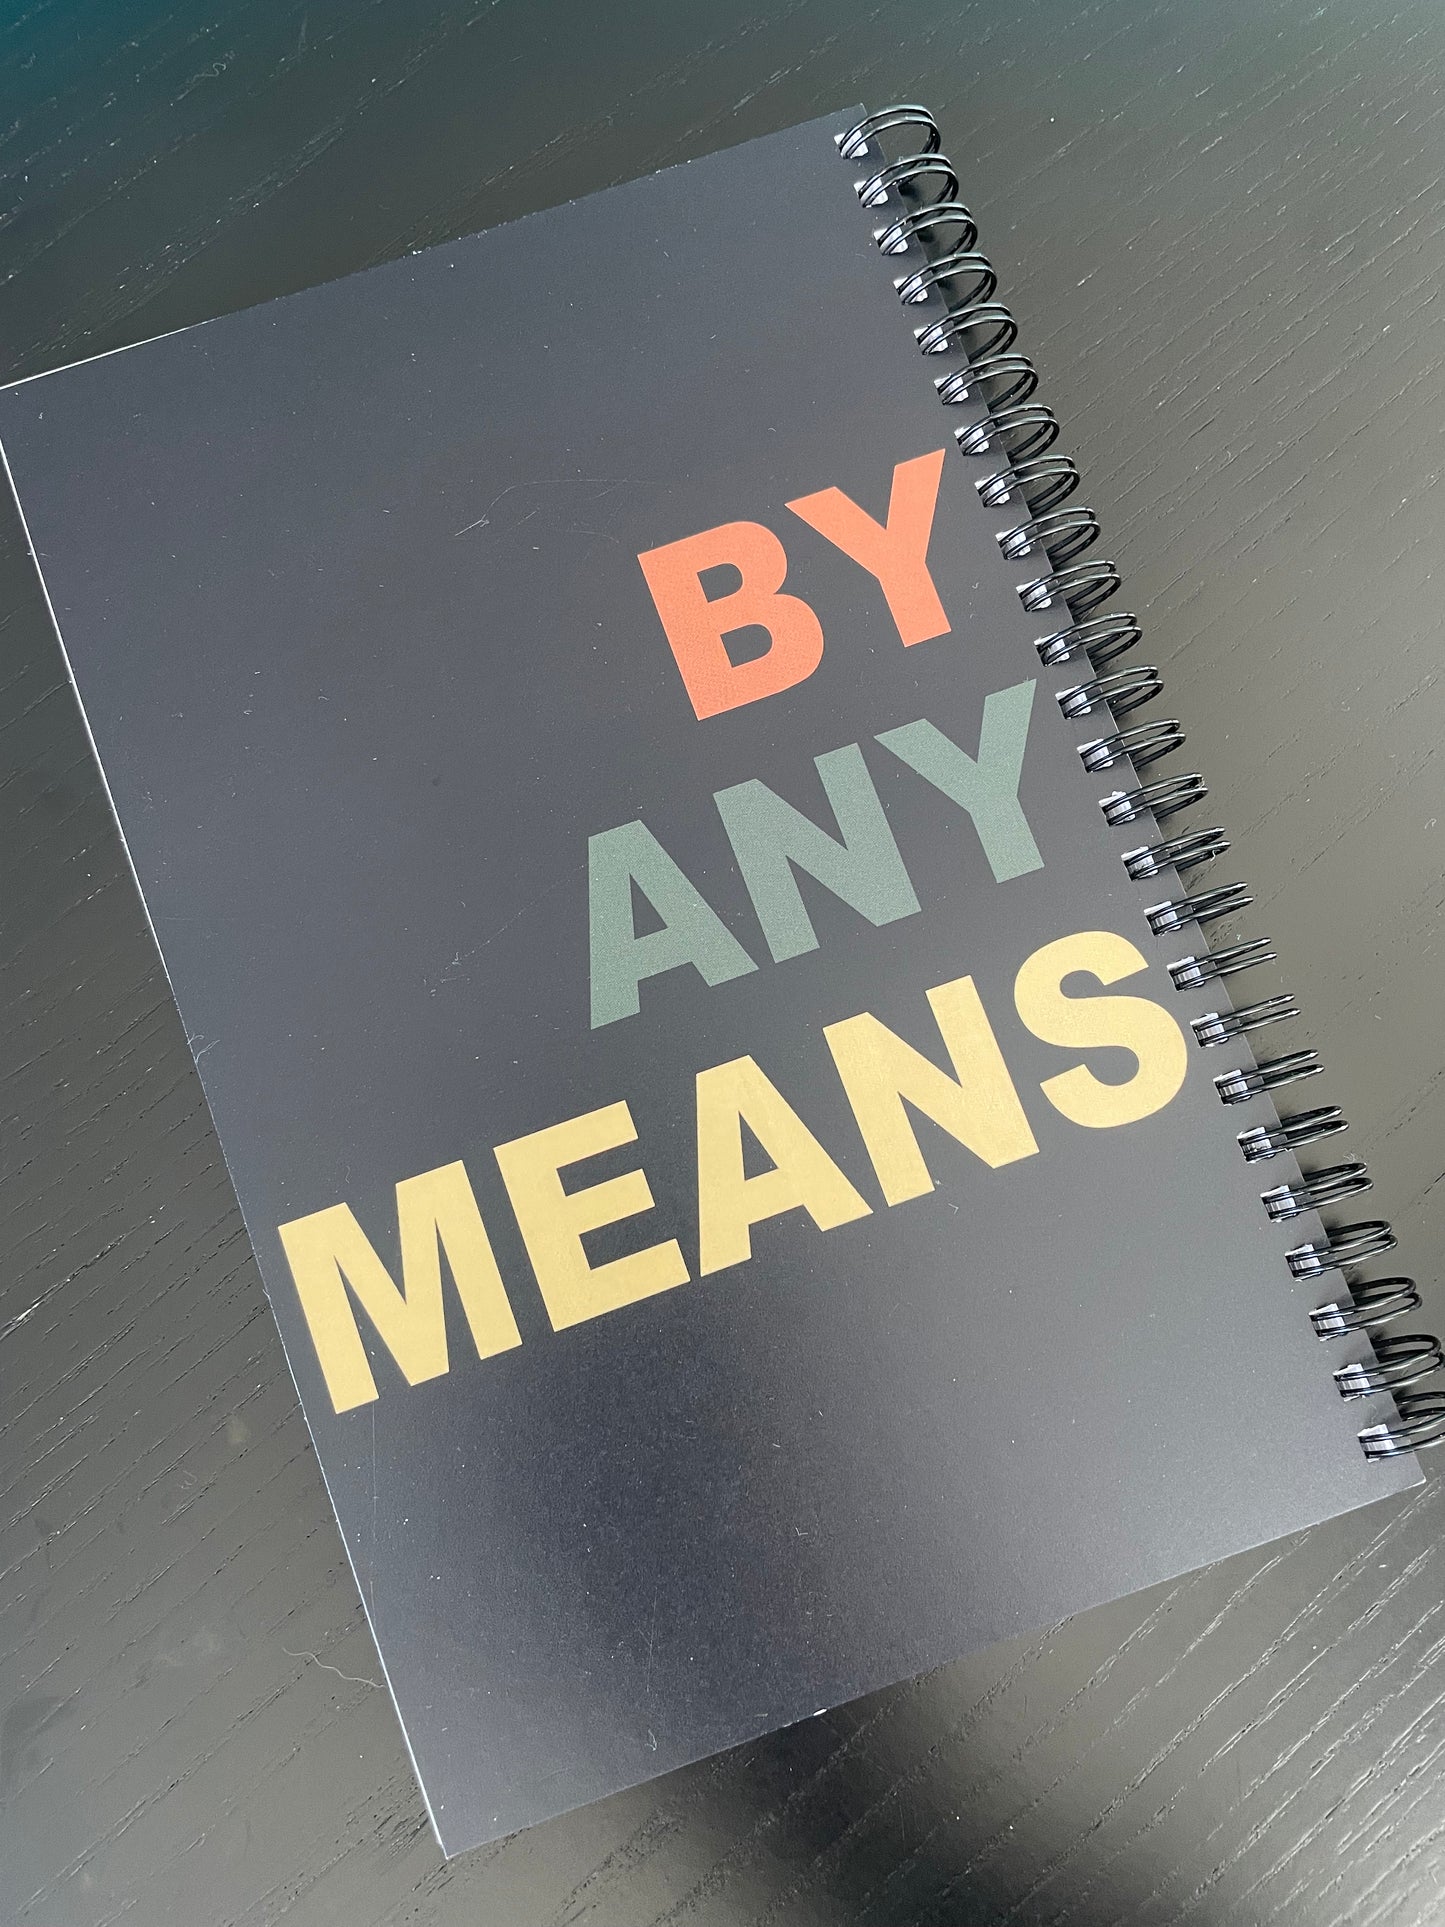 BY ANY MEANS - NOTEBOOK